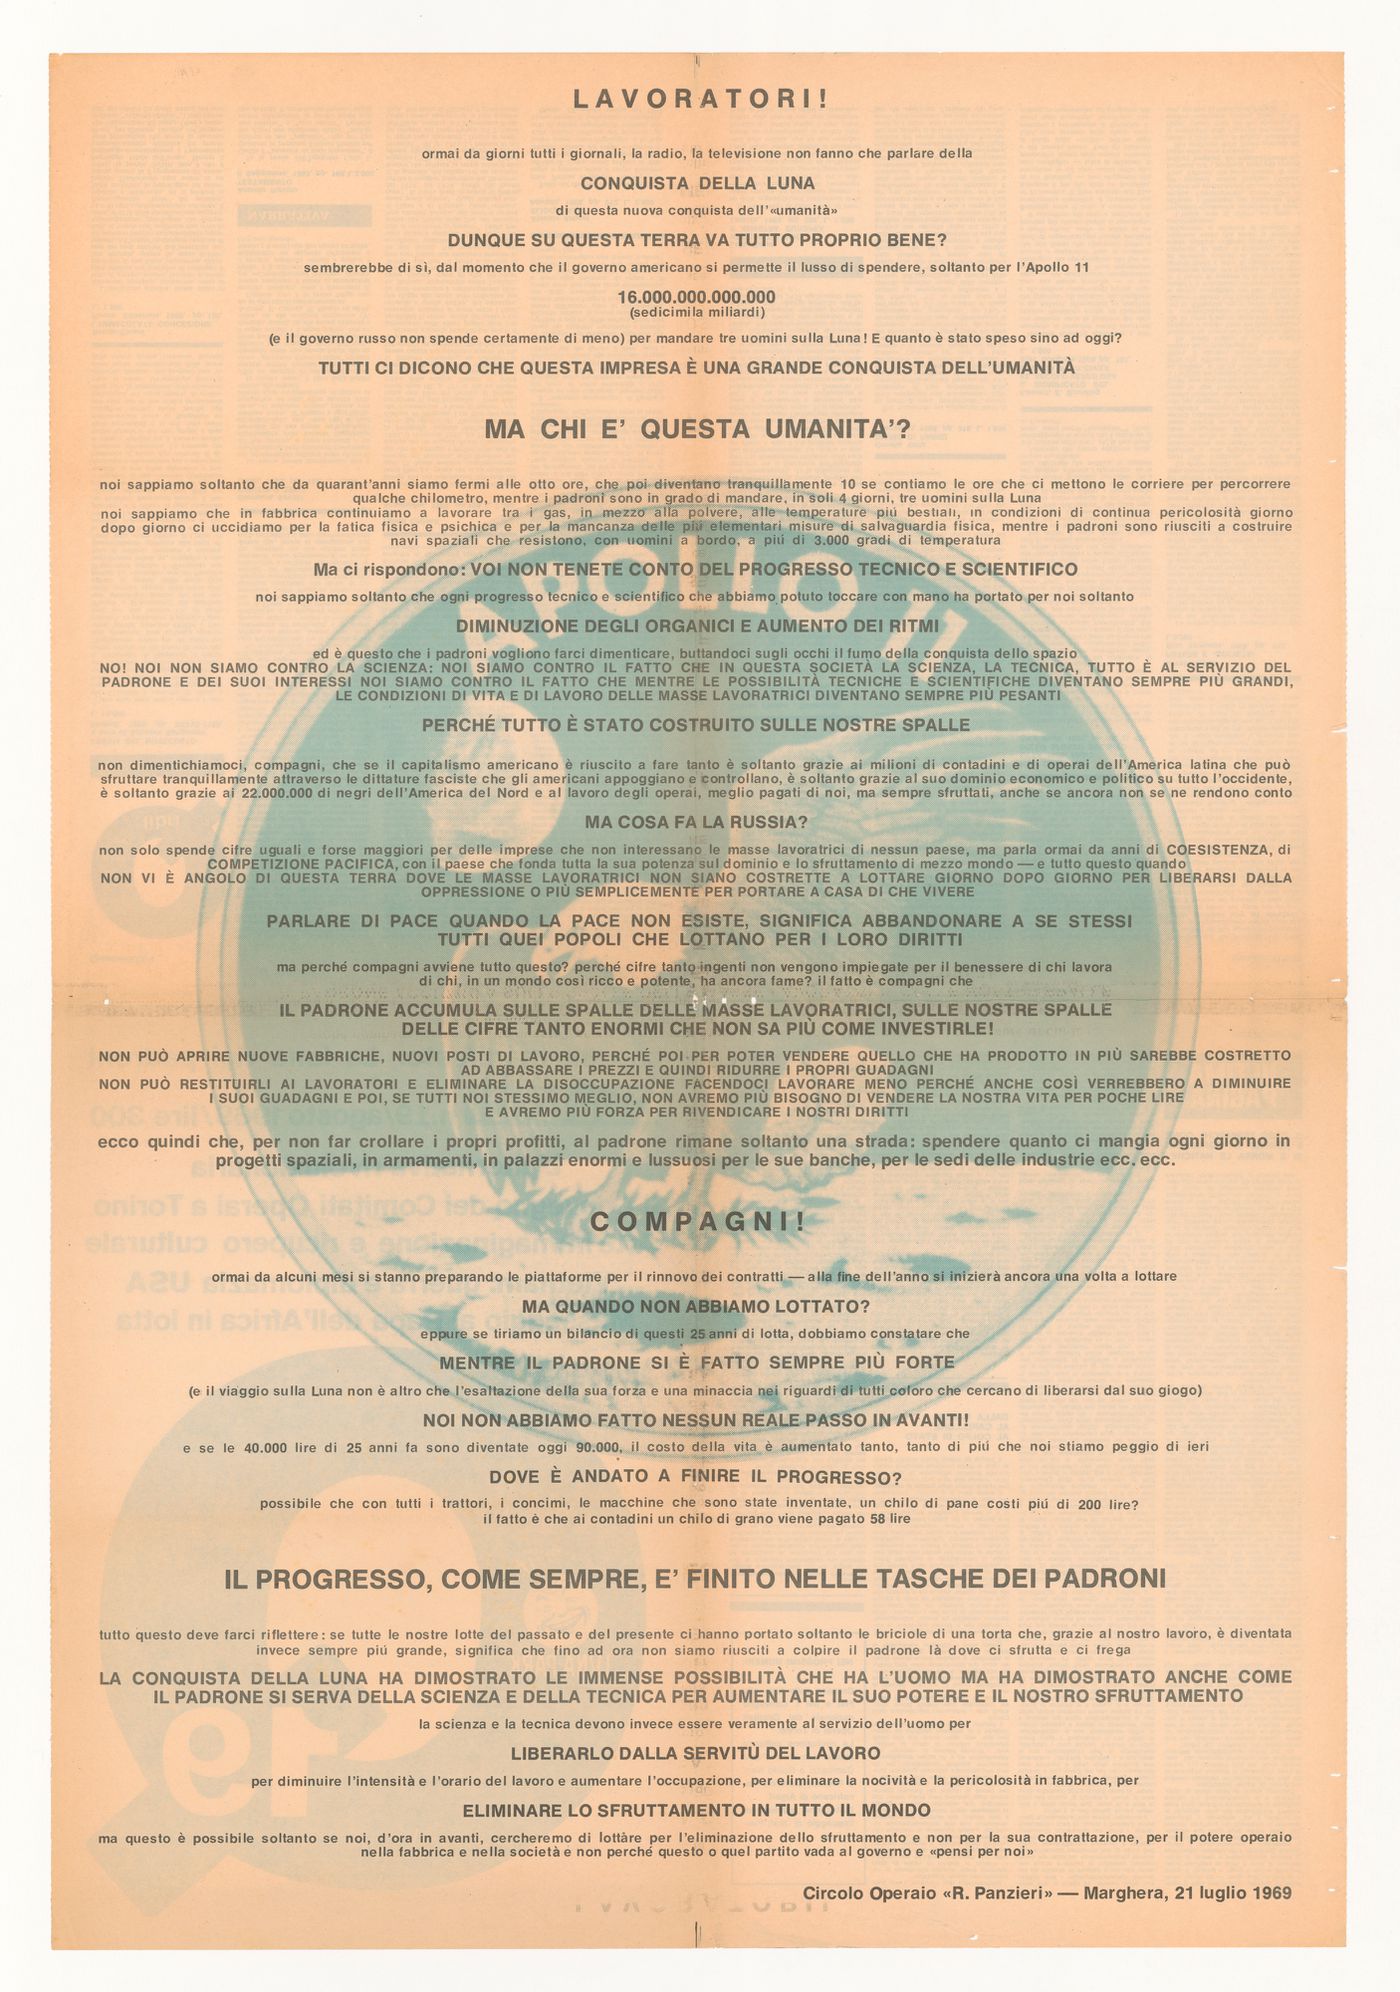 Workers' manifesto poster in response to the moon landing (from the project file Architettura Interplanetaria [Interplanetary Architecture])